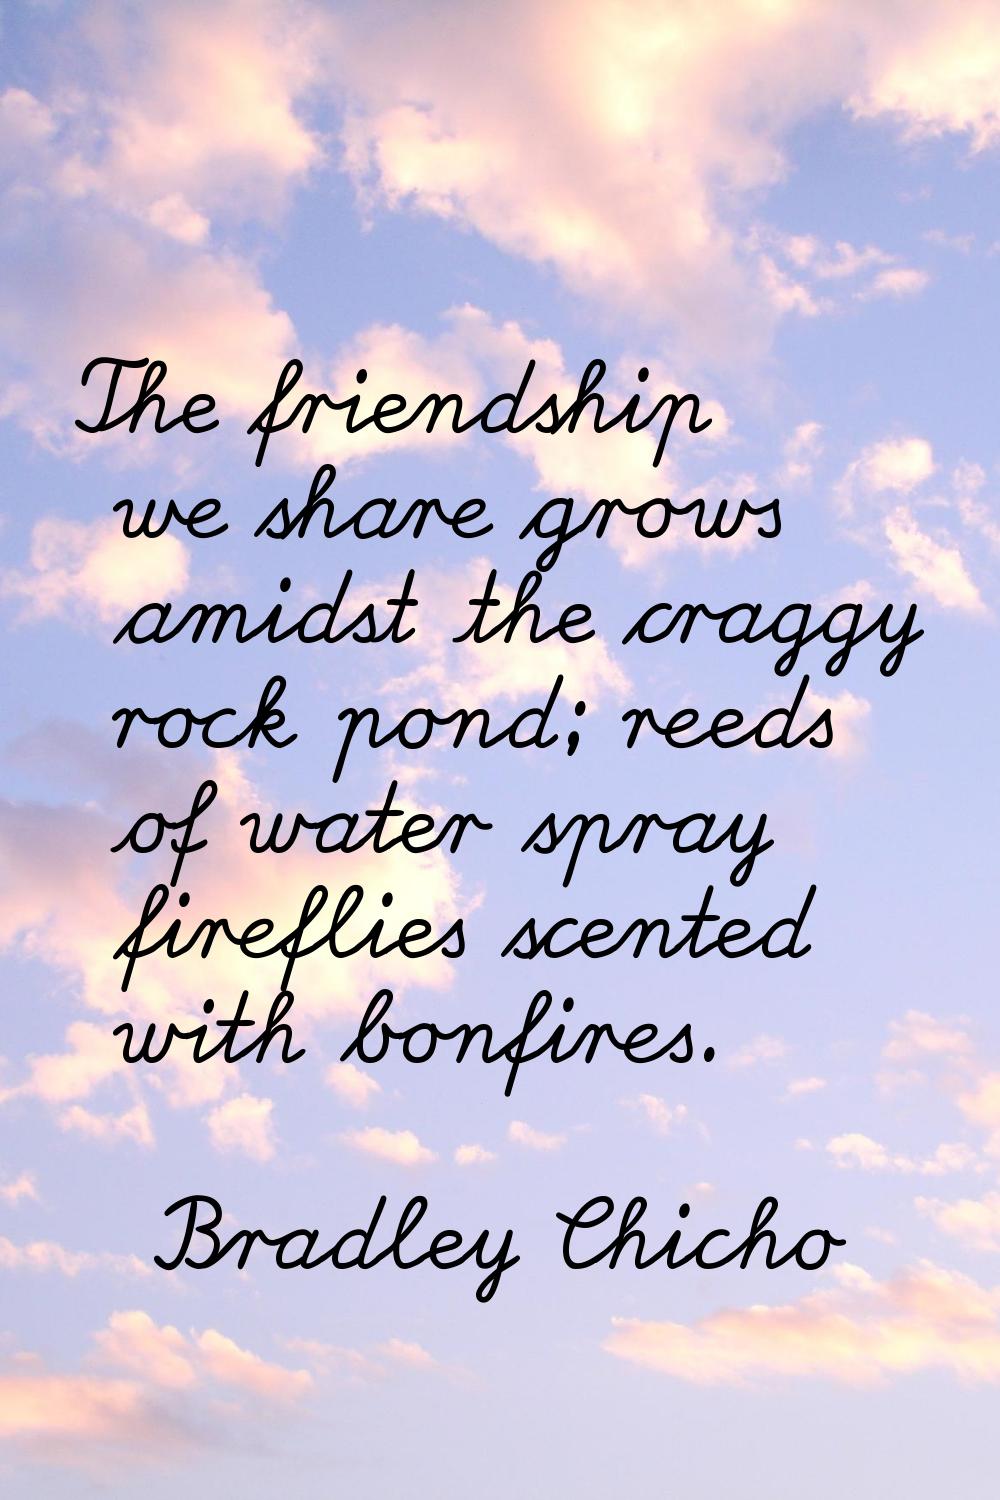 The friendship we share grows amidst the craggy rock pond; reeds of water spray fireflies scented w